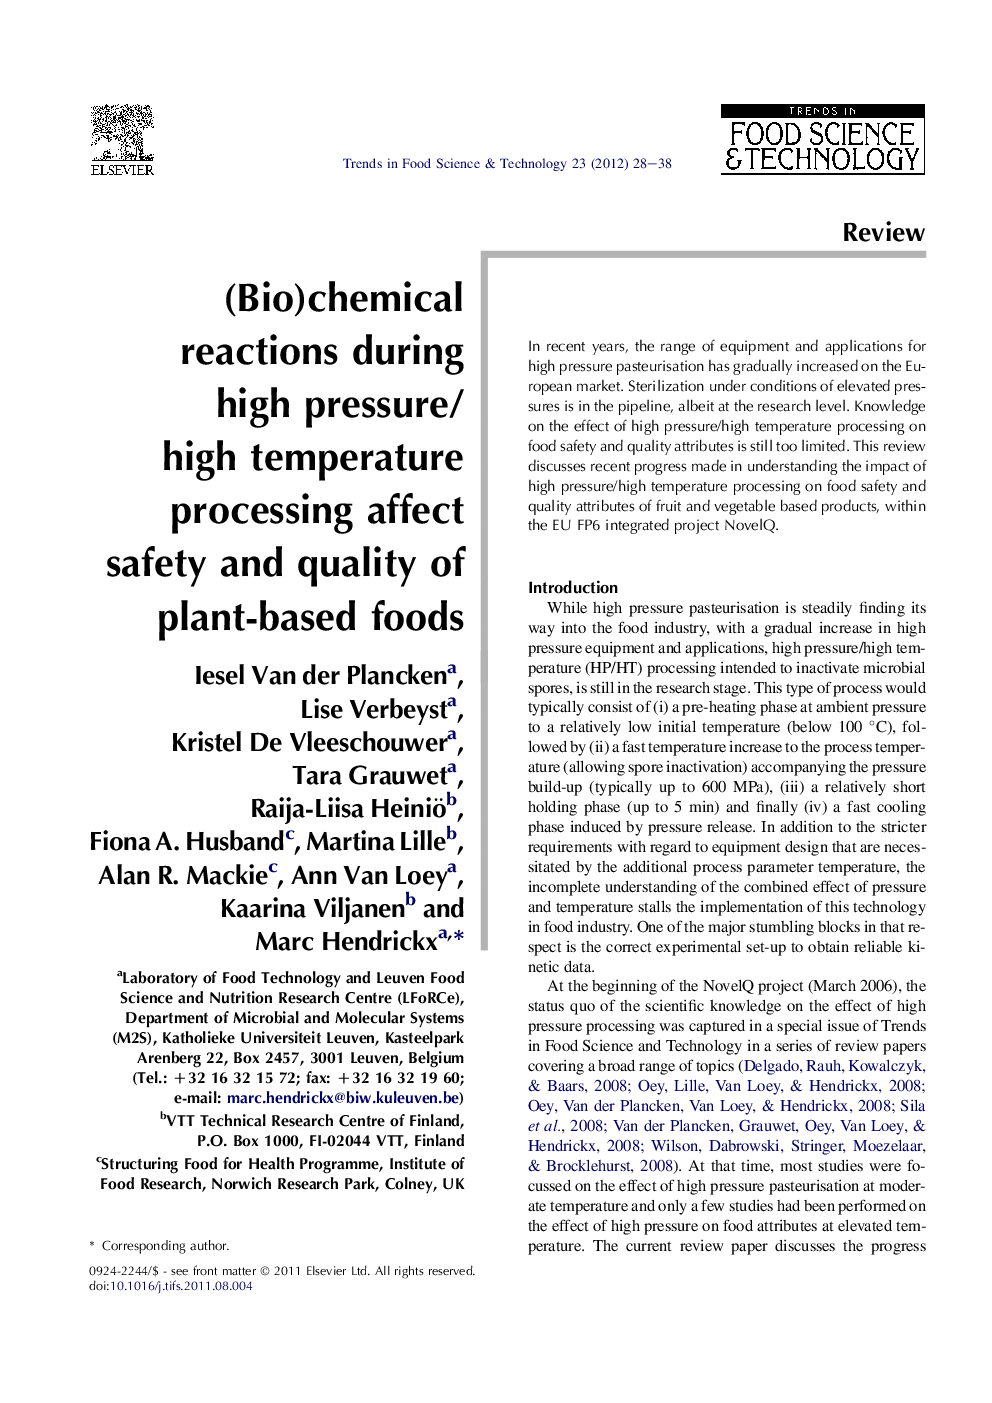 (Bio)chemical reactions during high pressure/high temperature processing affect safety and quality of plant-based foods